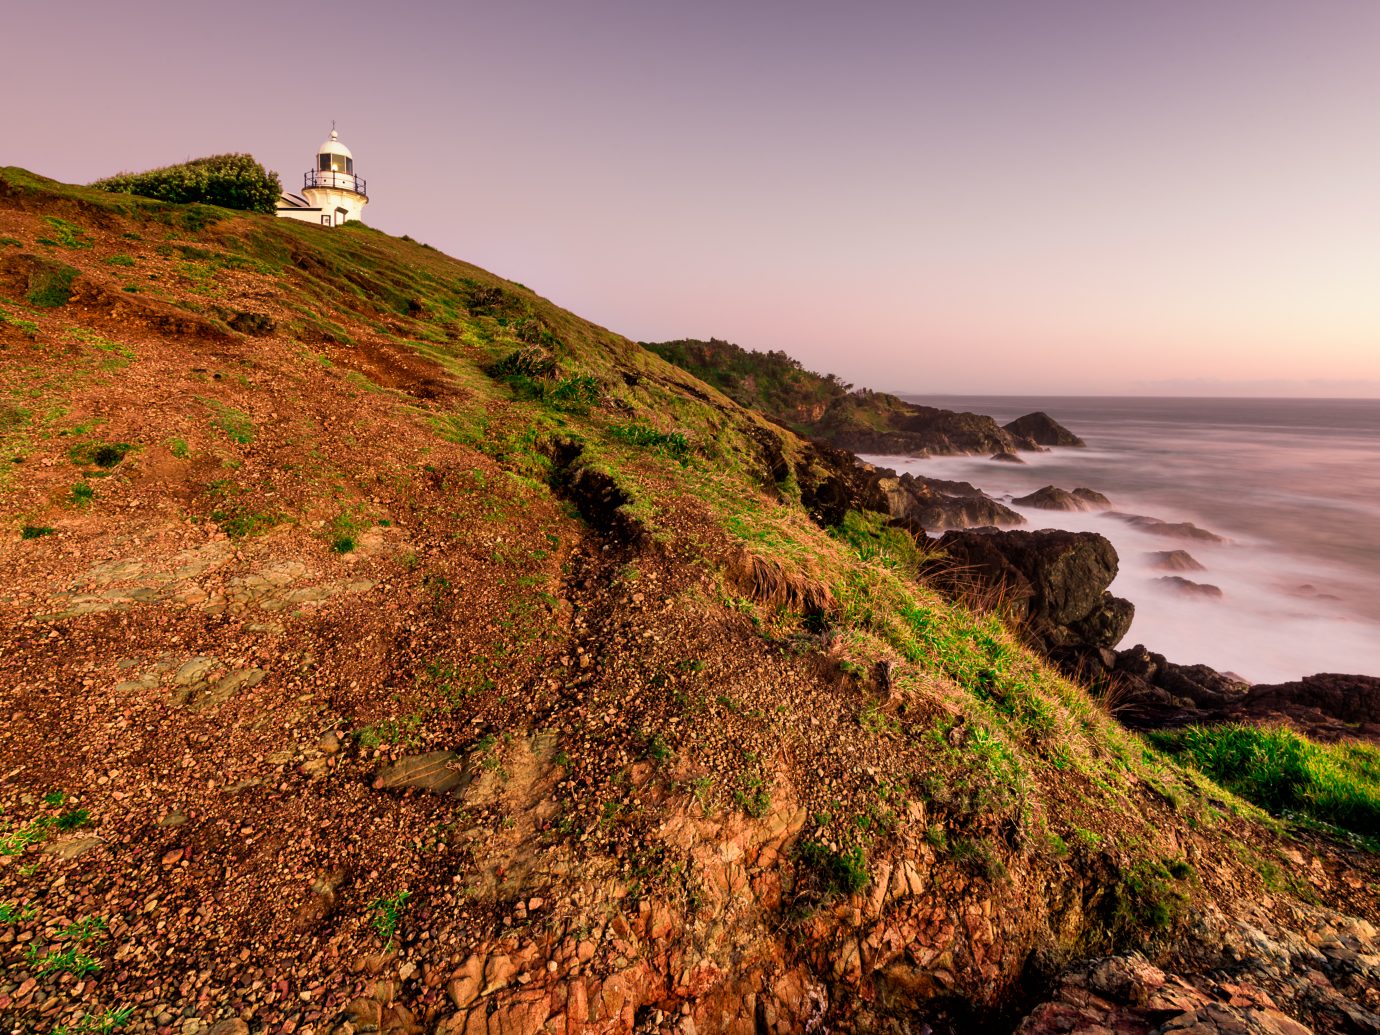 at Lighthouse Beach during sunrise - located in Port Macquarie